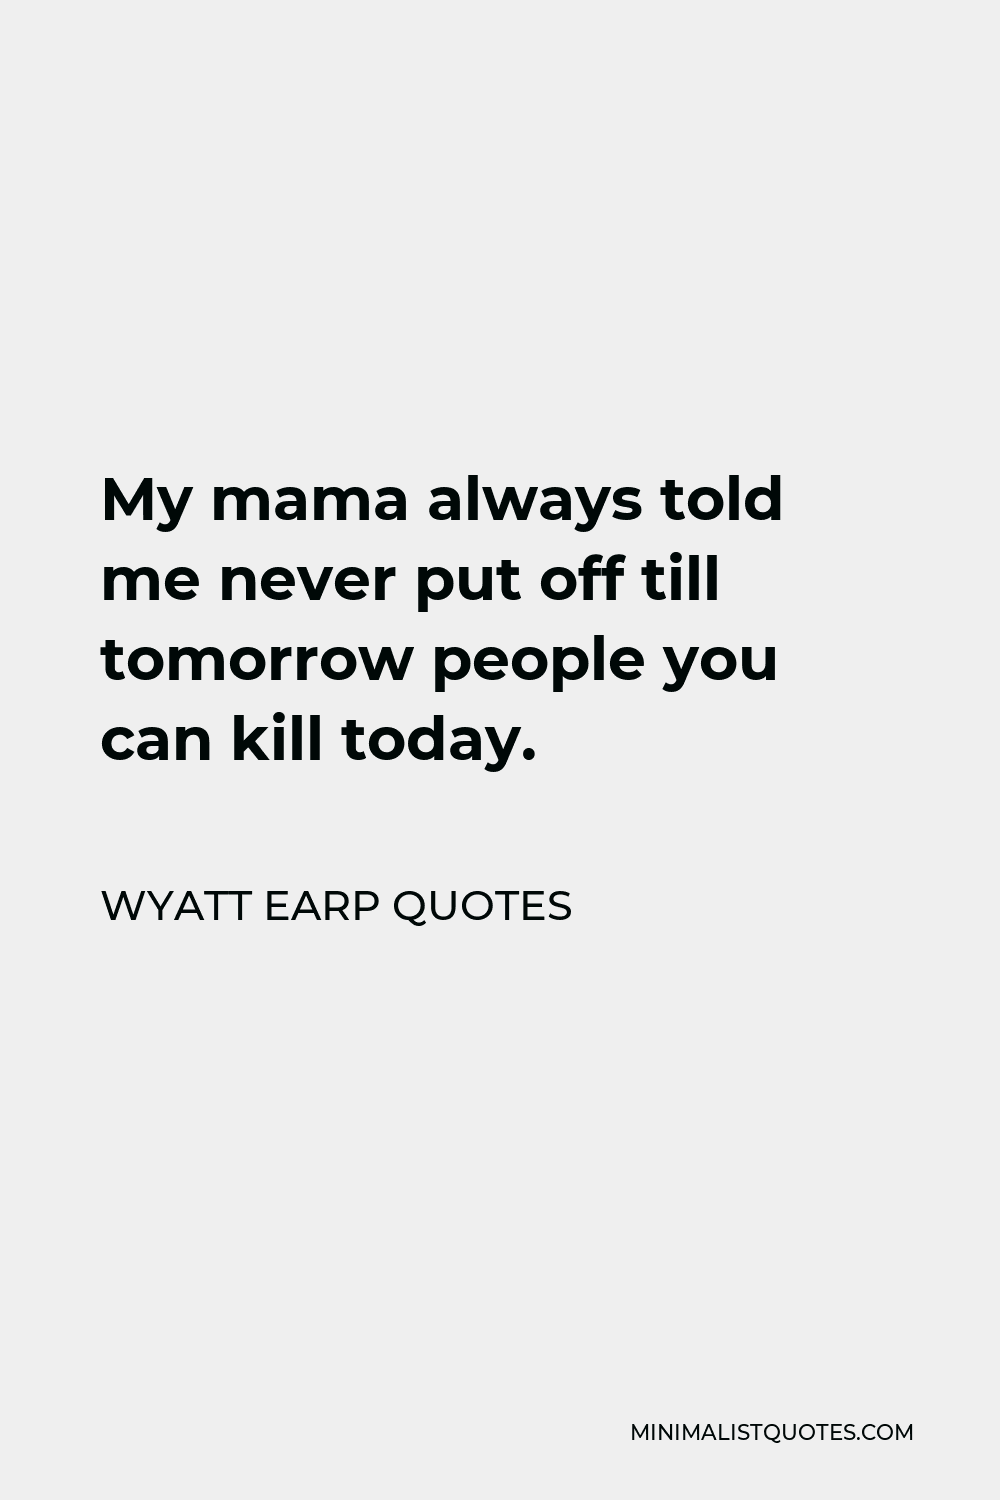 Wyatt Earp Quotes Quote - My mama always told me never put off till tomorrow people you can kill today.